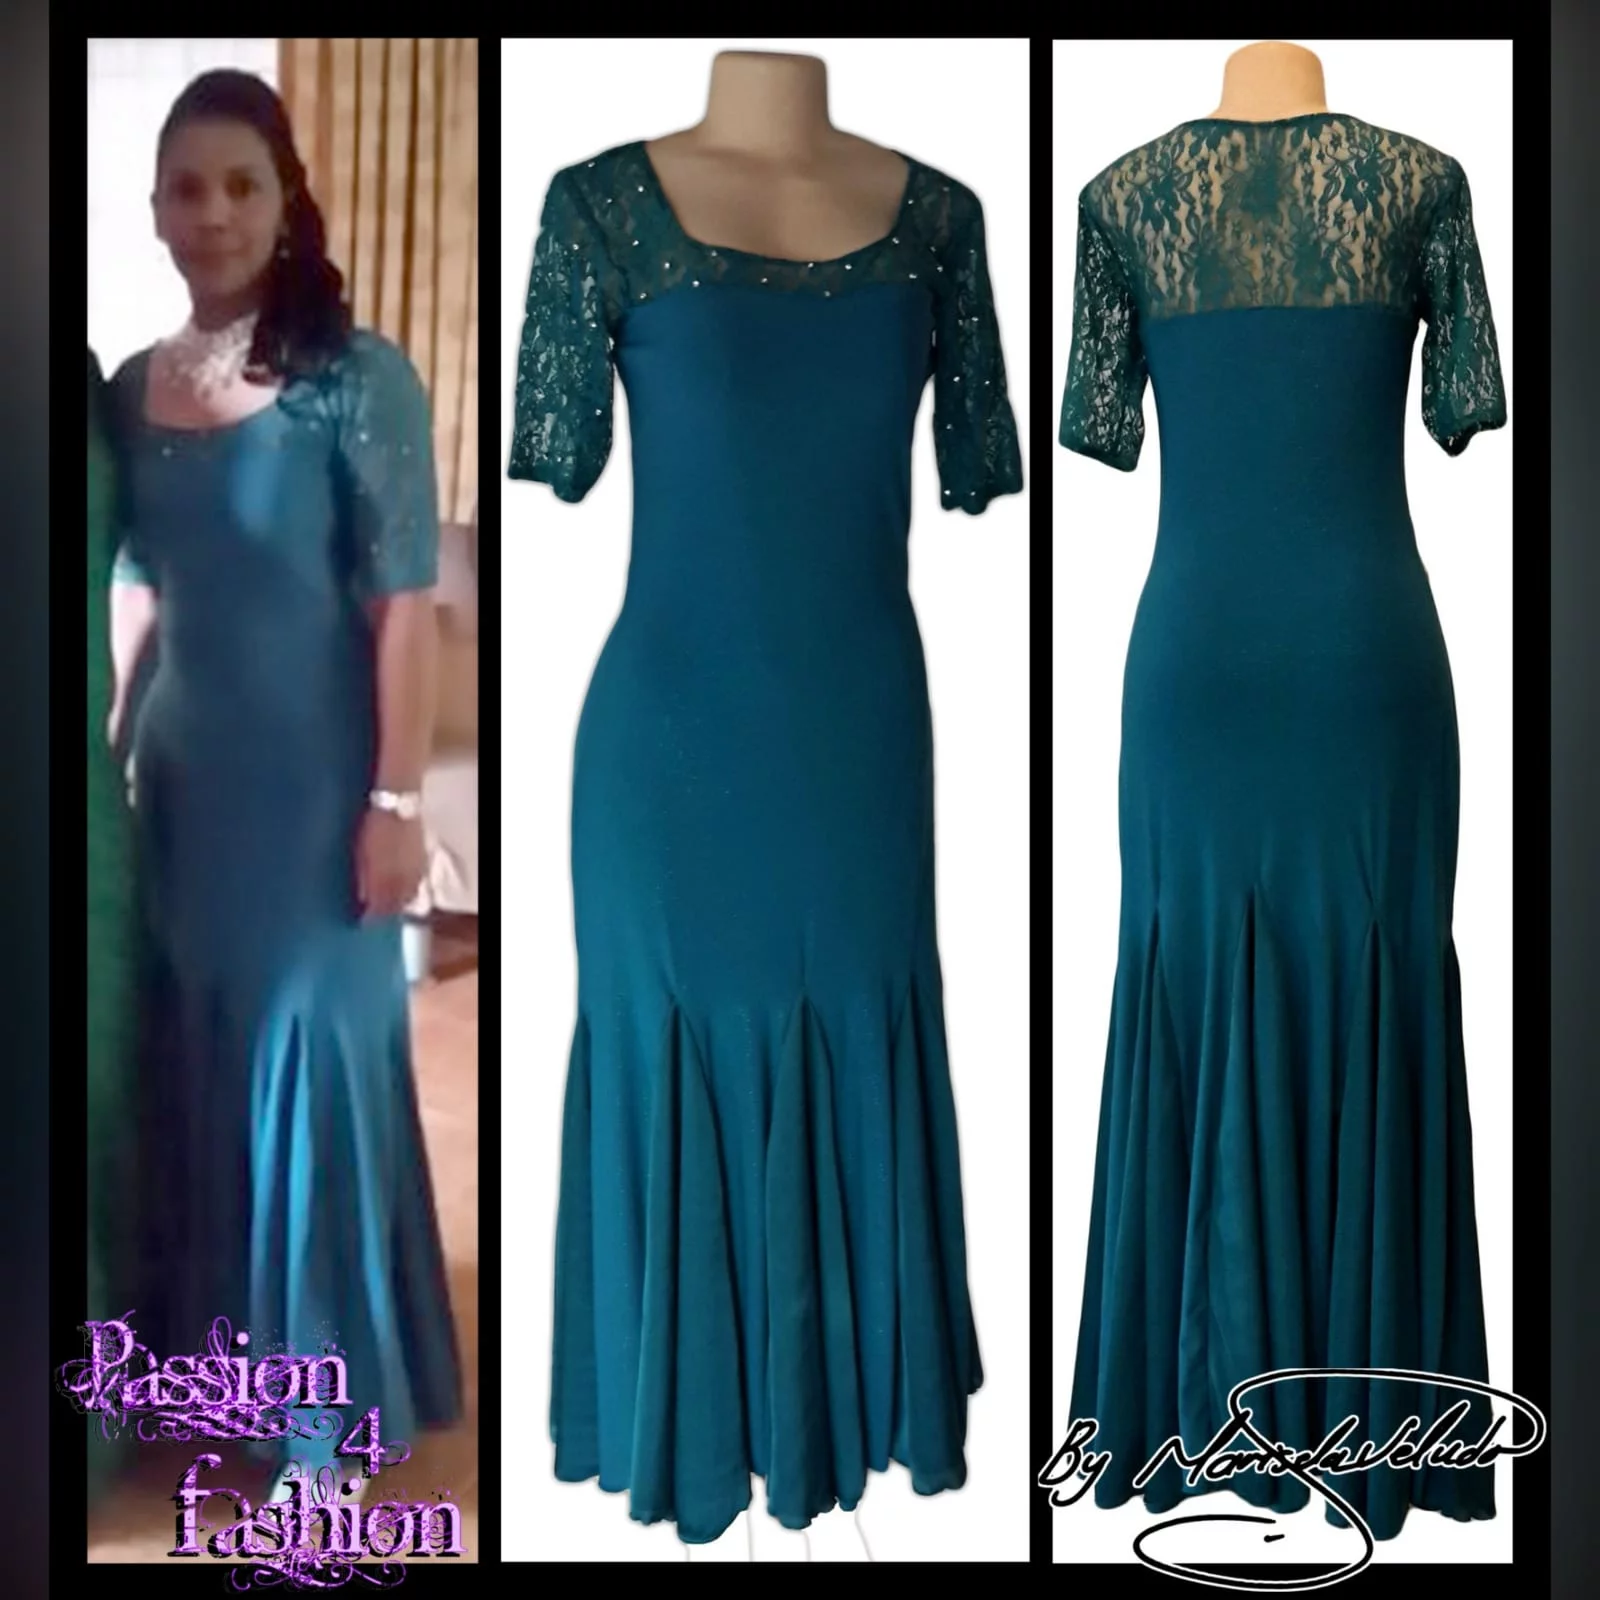 Turquoise green long party dress 5 turquoise green long party dress, fitted till hip then it flows, with a lace neckline scattered with a few beads